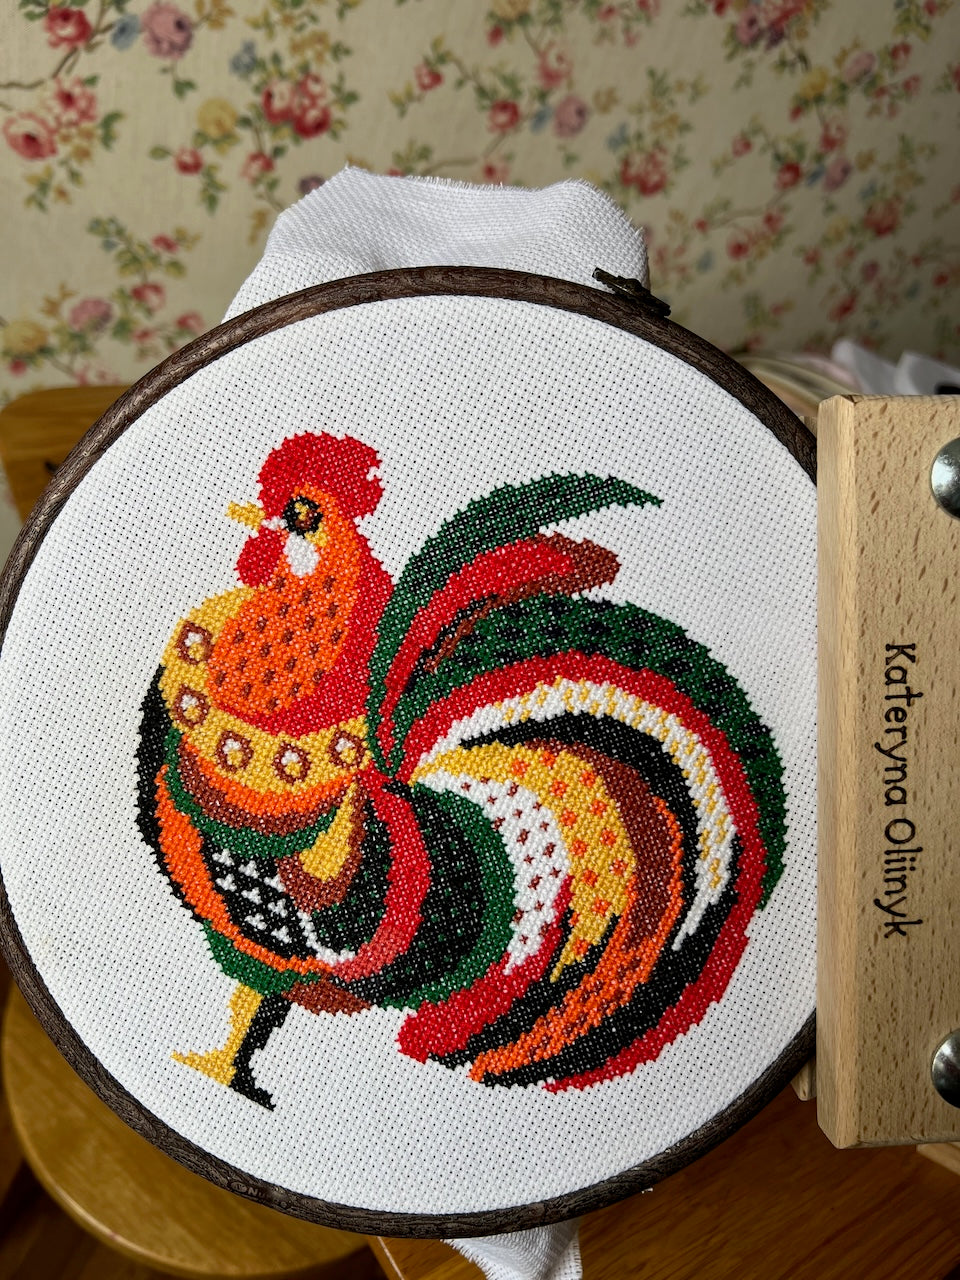 Rooster - cross stitch pattern